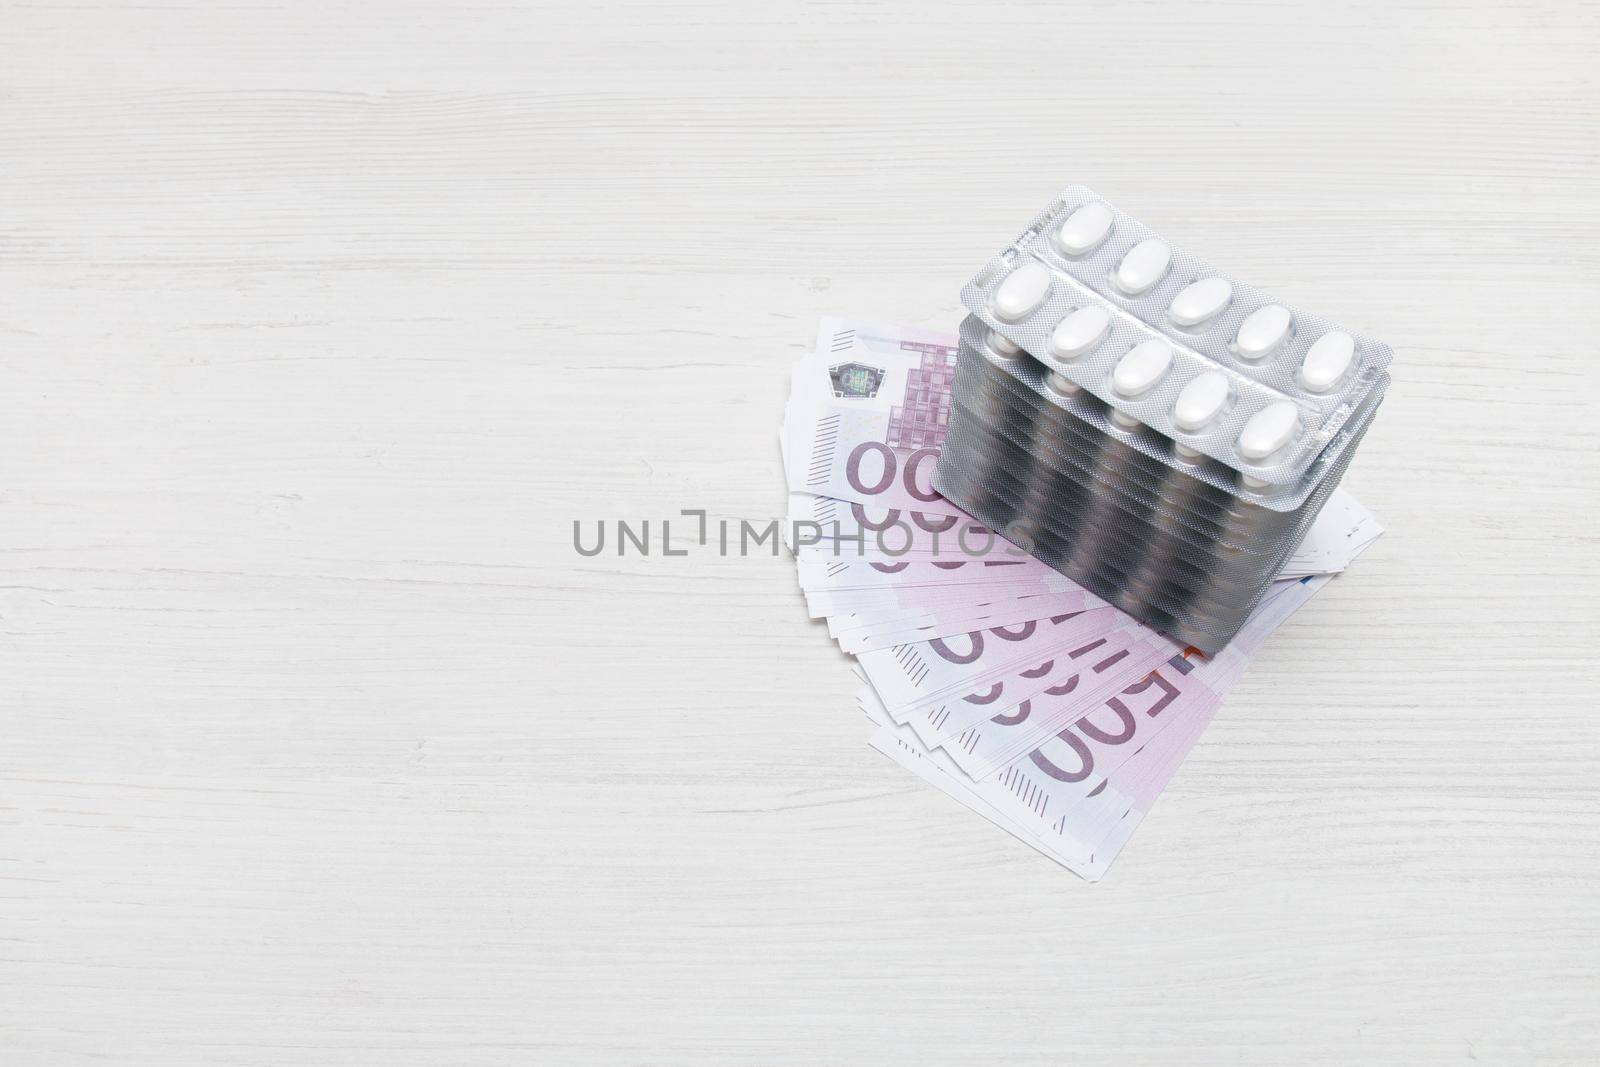 several blisters of tablets on a stack of notes for $ 100, light background, copy space by natashko